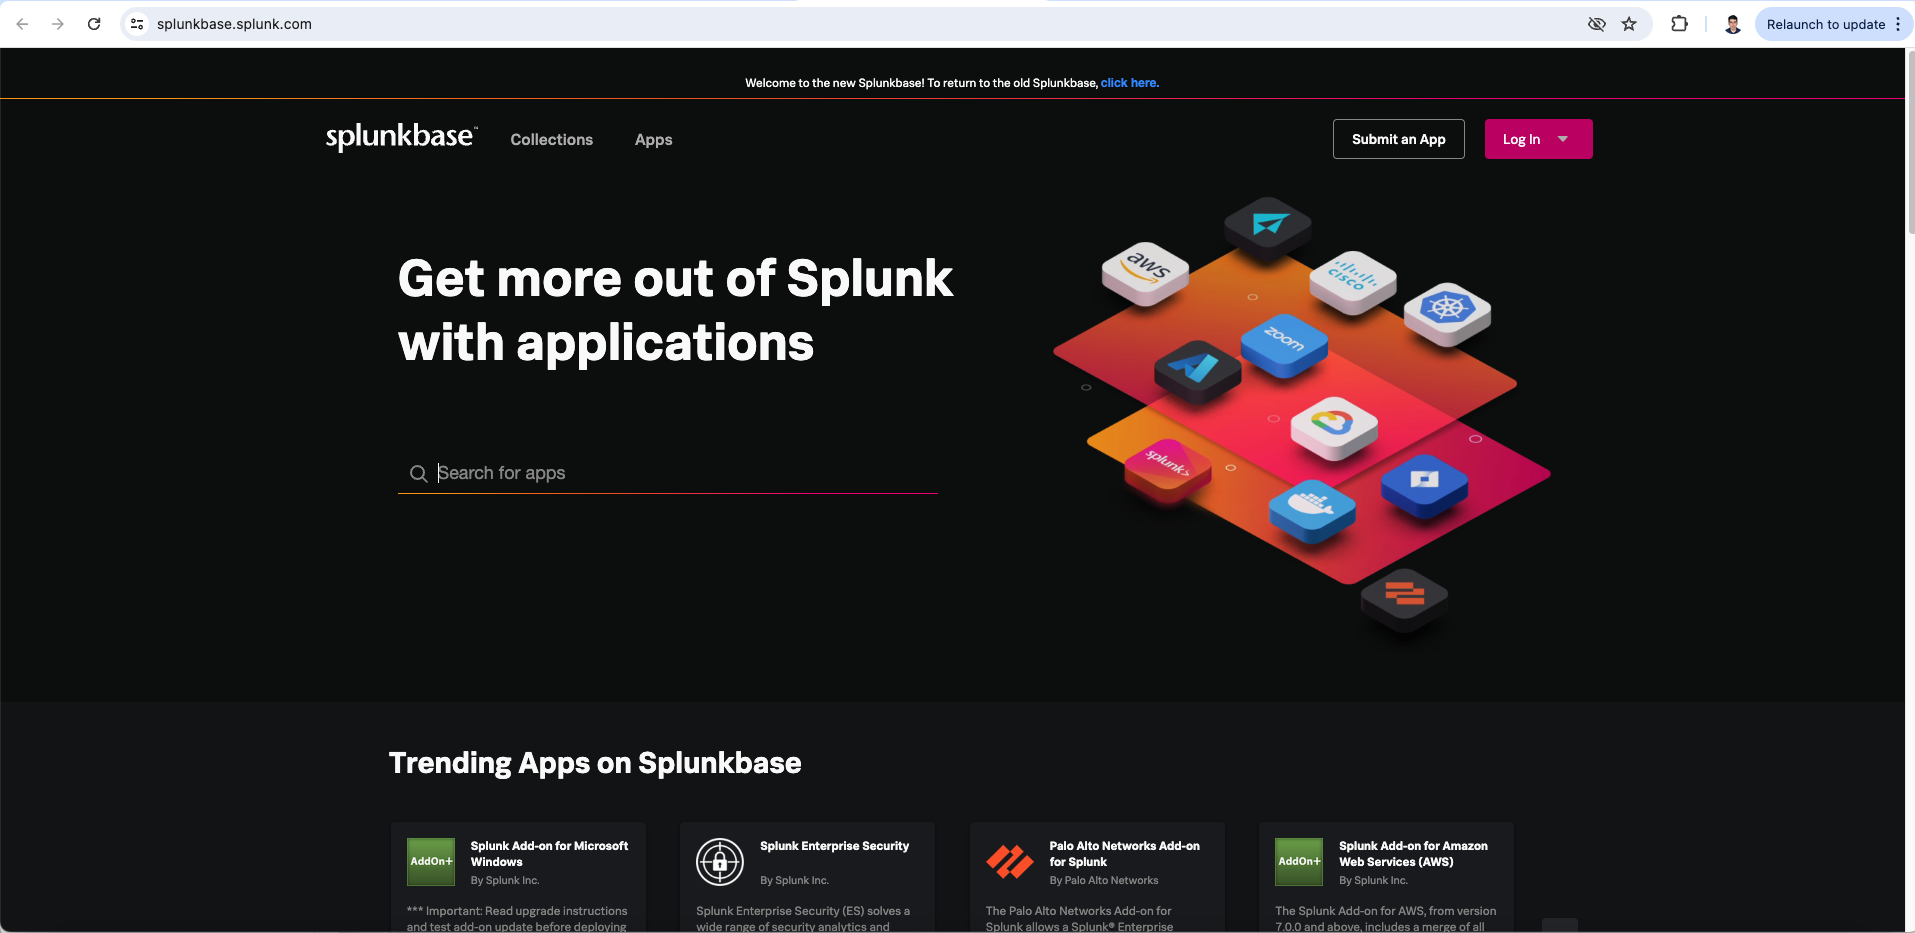 Homepage of Splunkbase featuring a search bar and graphical icons representing various application integrations.